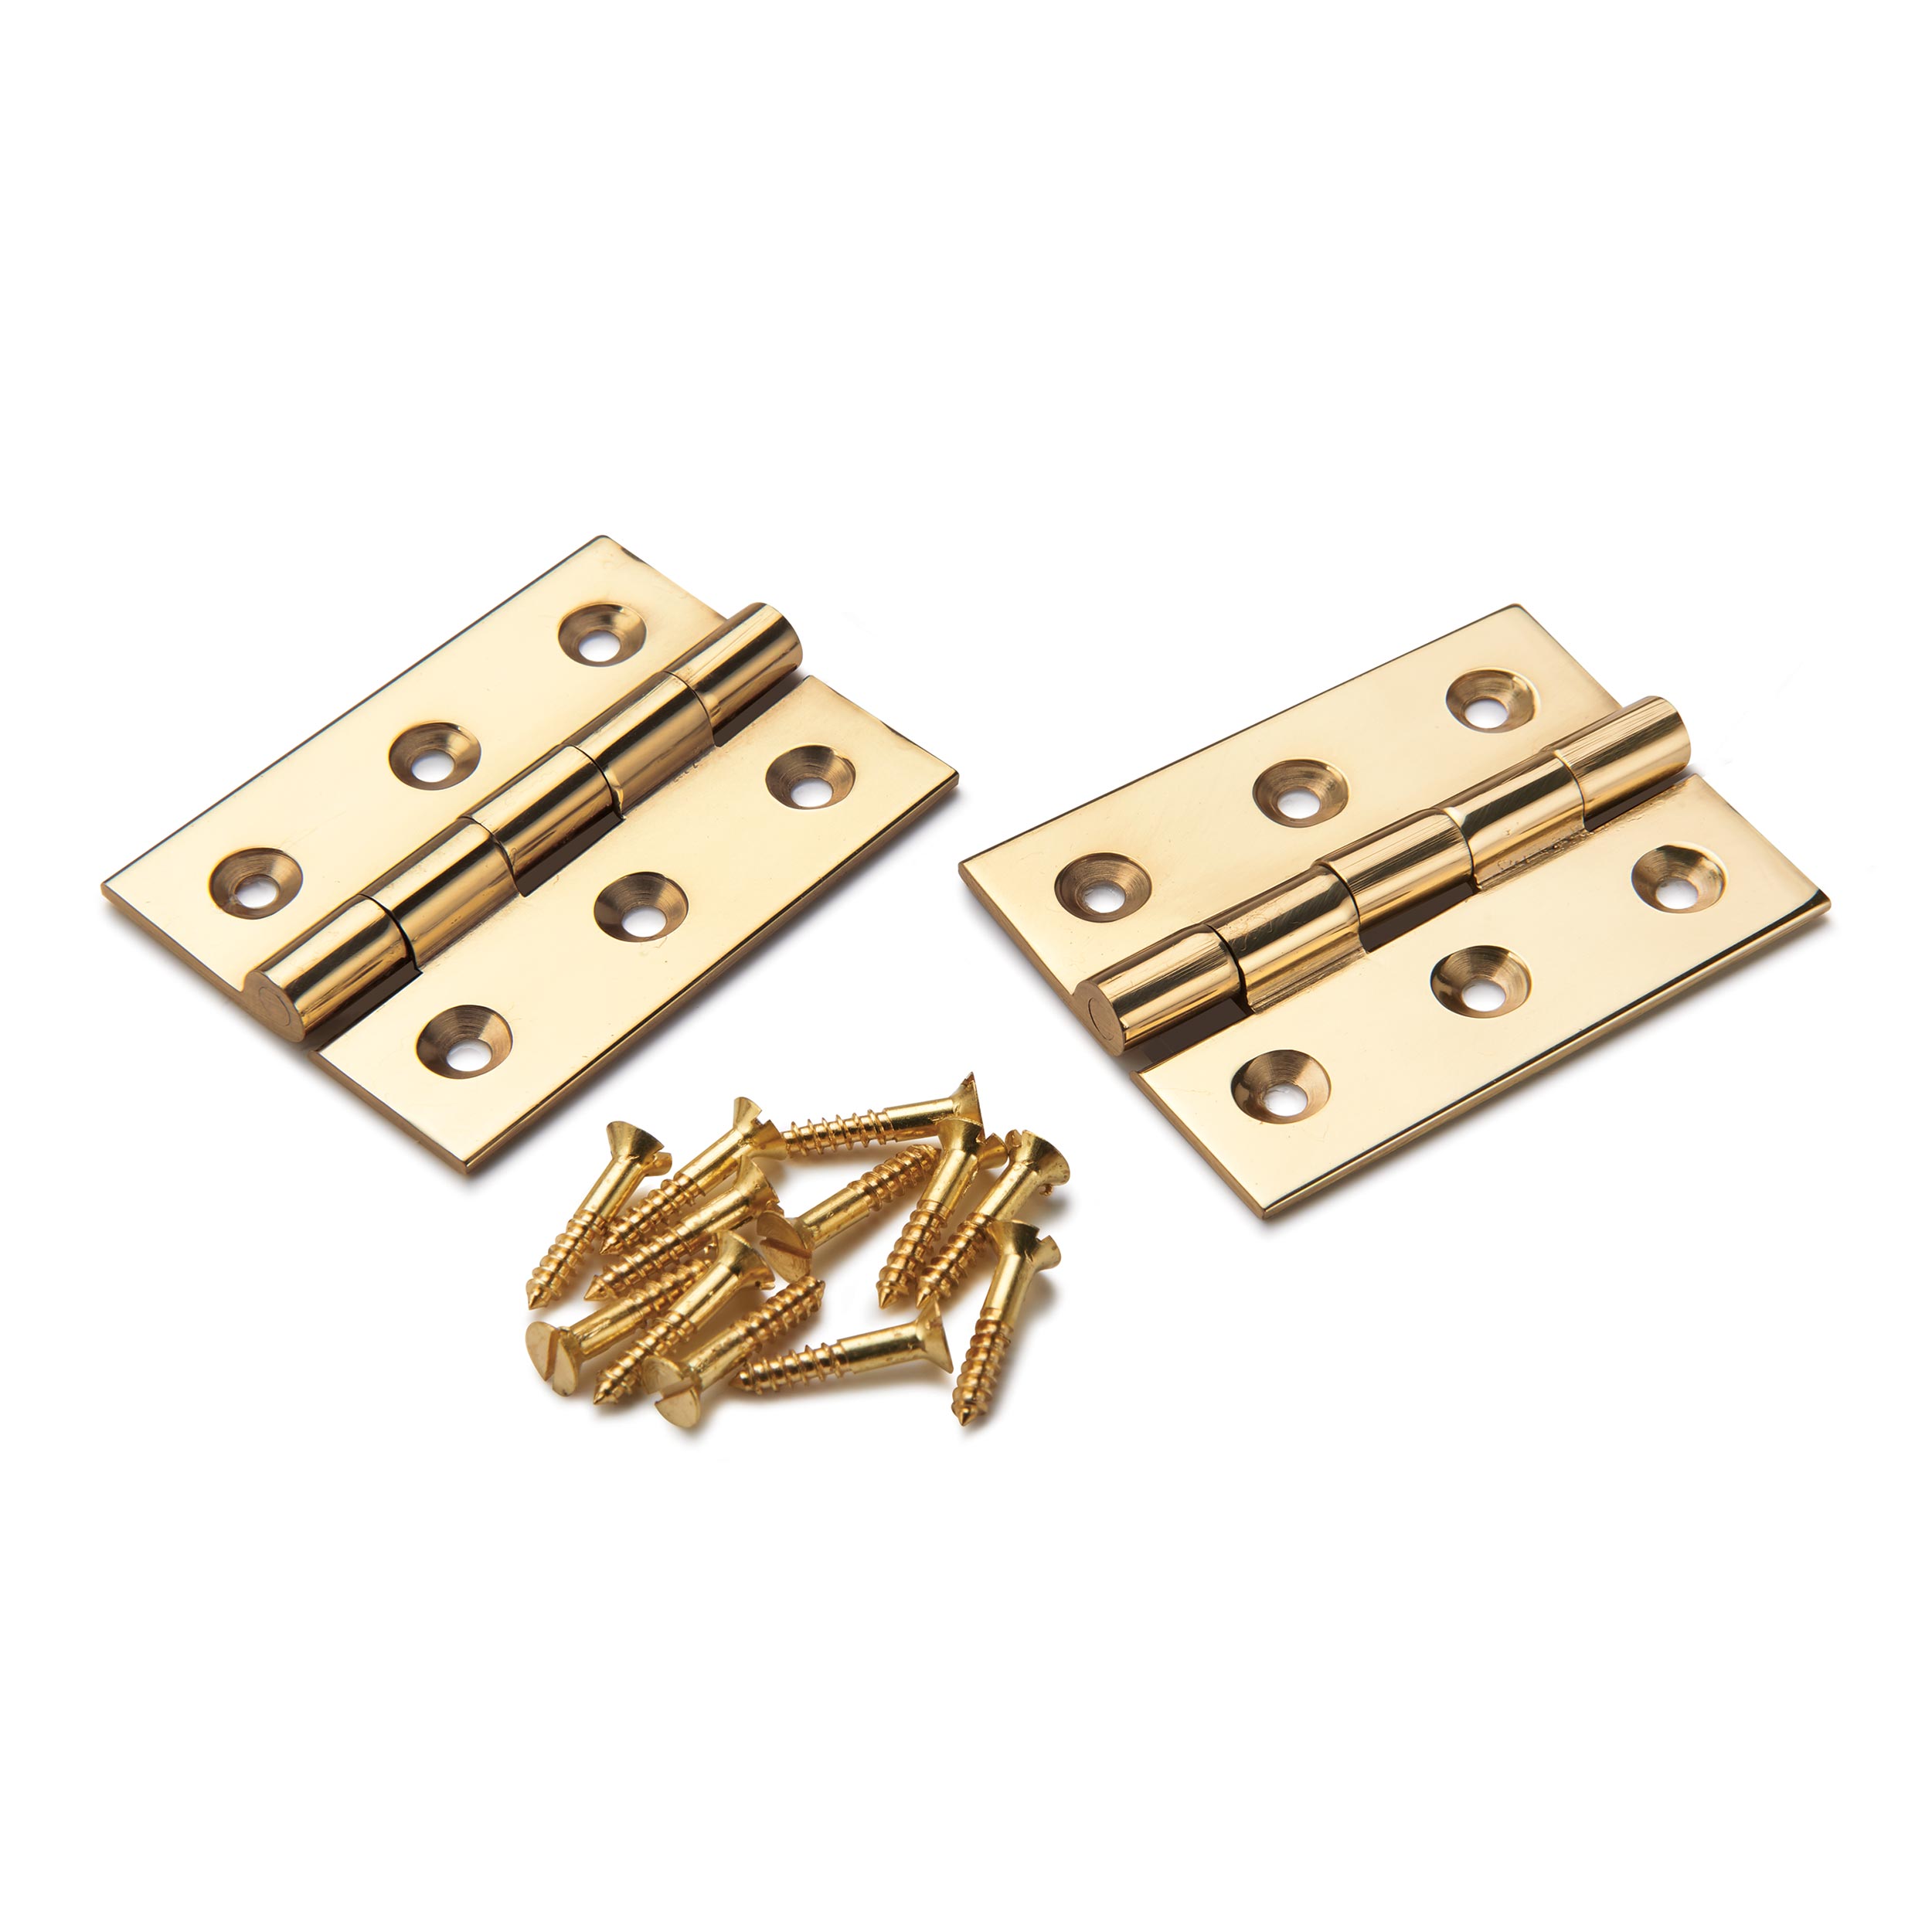 Cabinet Hinge, Polished Brass 2" X 1-1/2", Pair